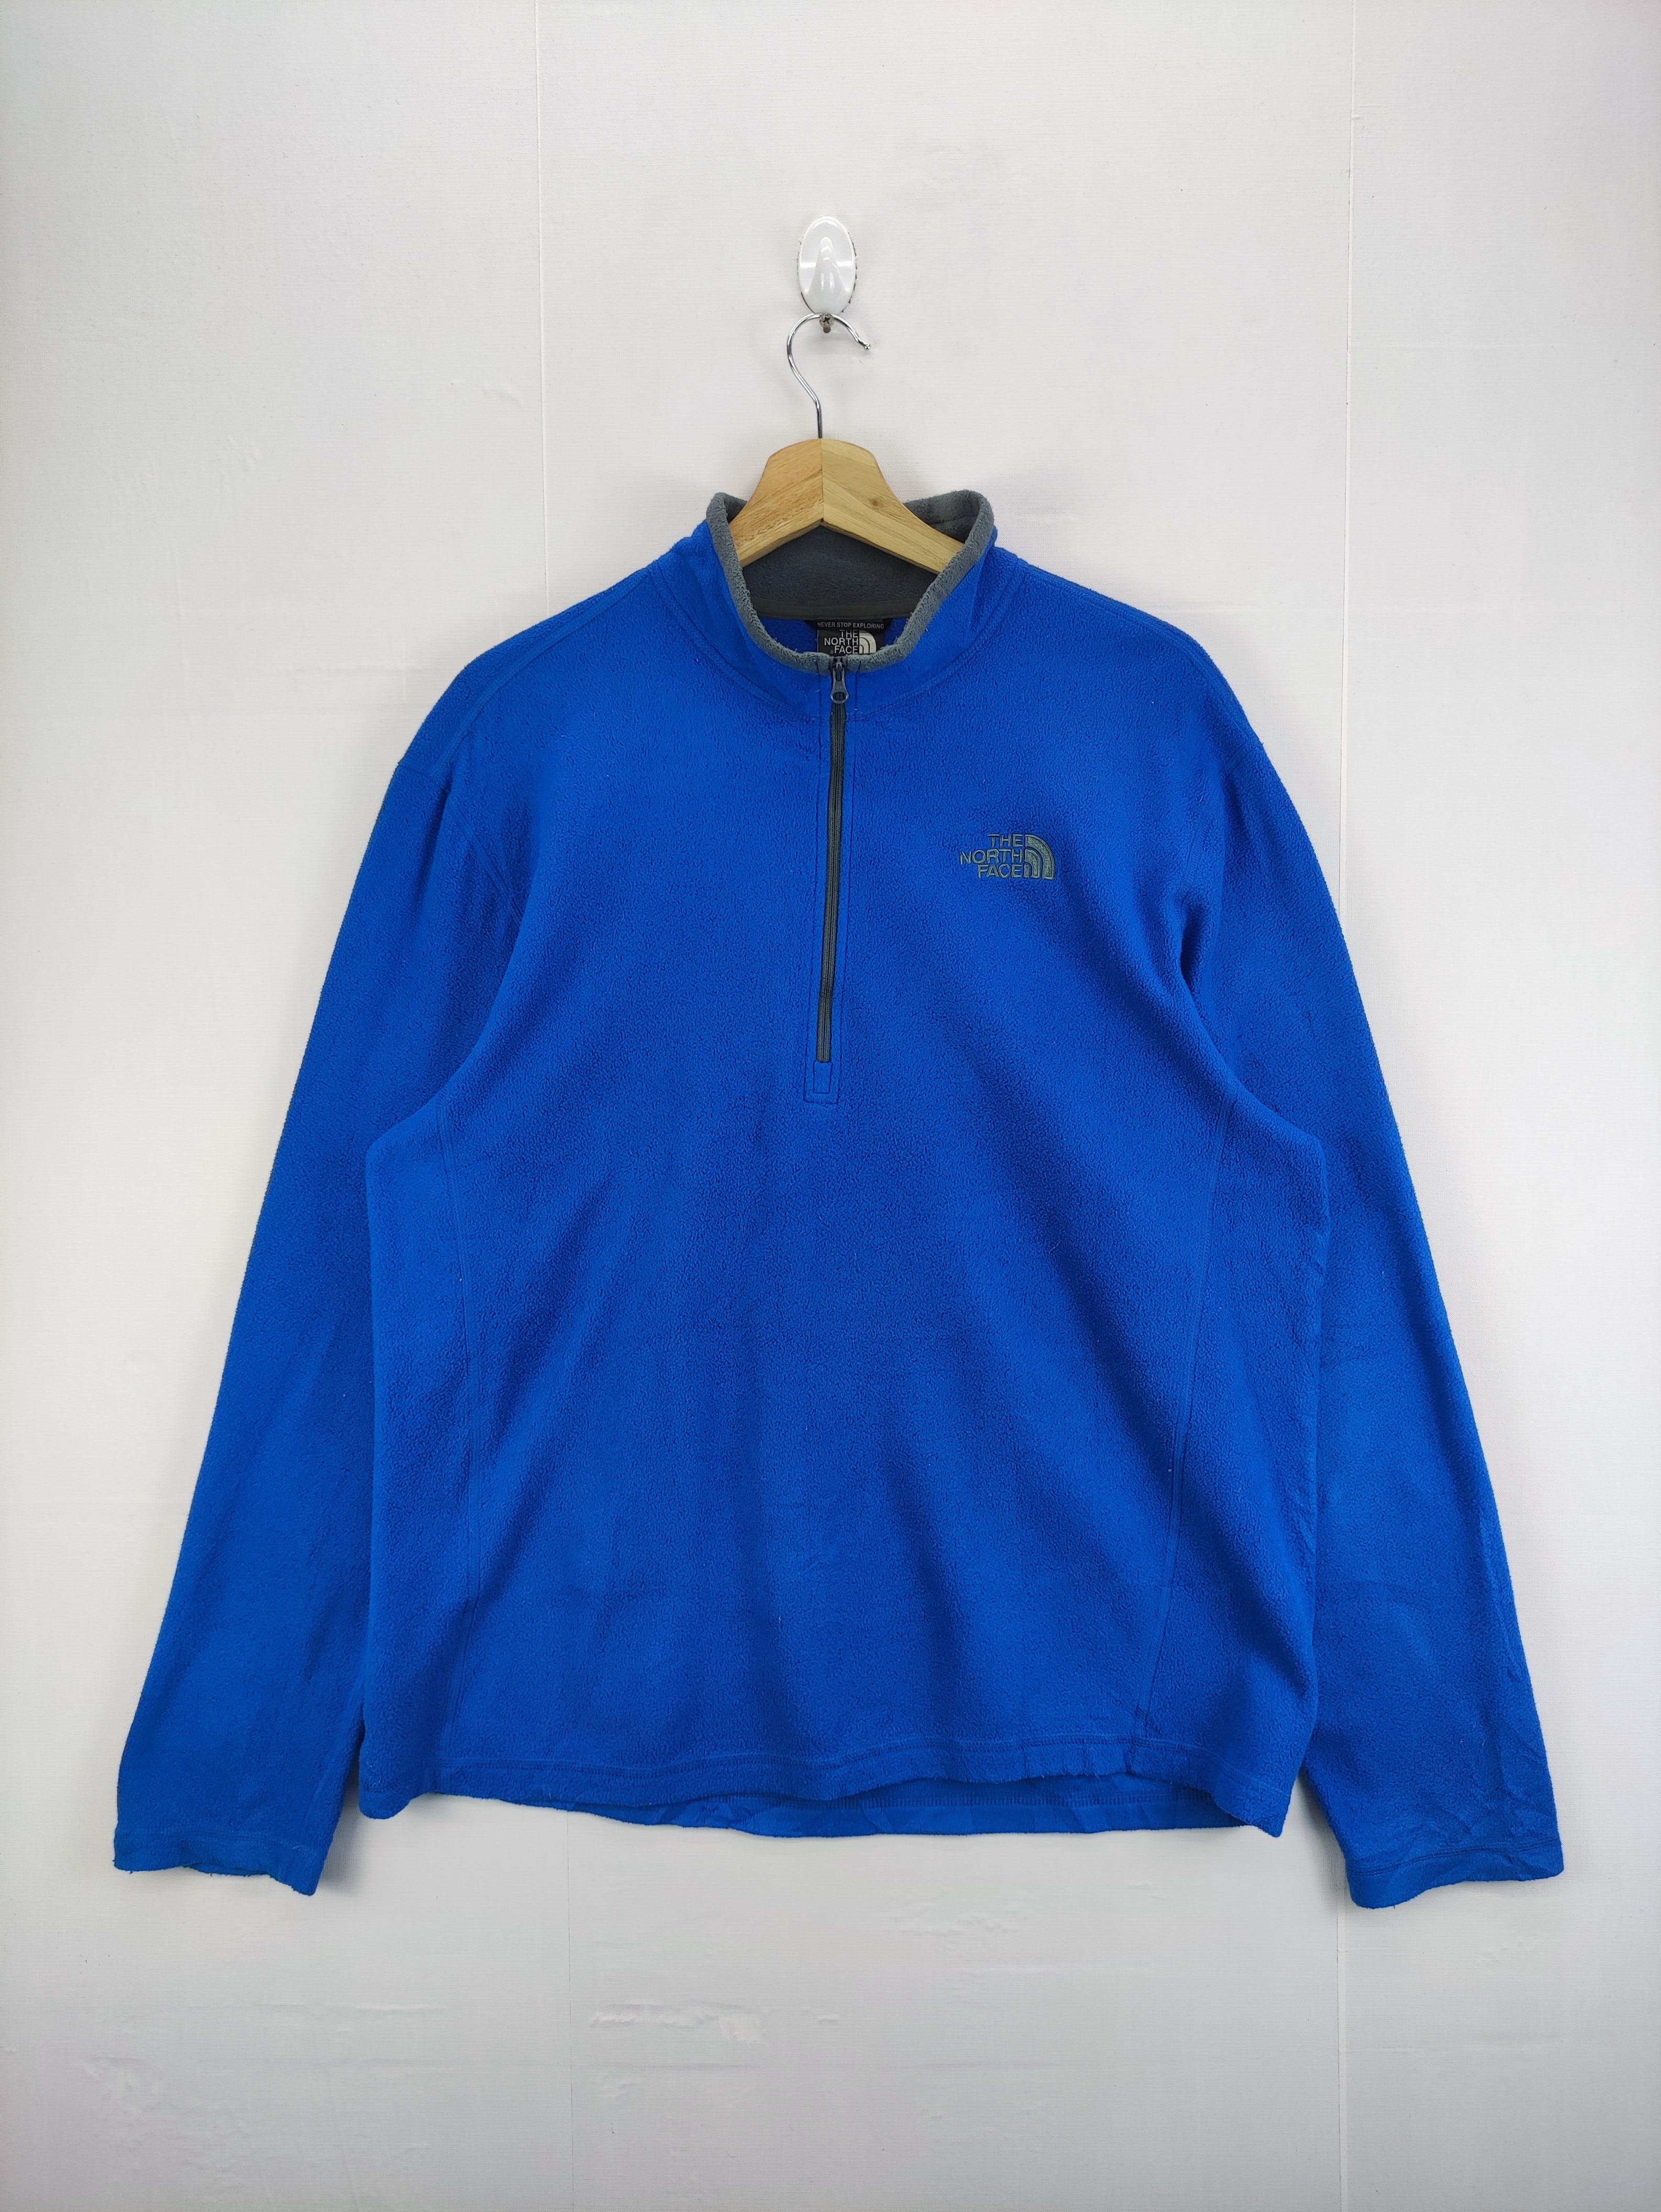 Outdoor Style Go Out! - The North Face Fleece Sweater Half Zipper - 1